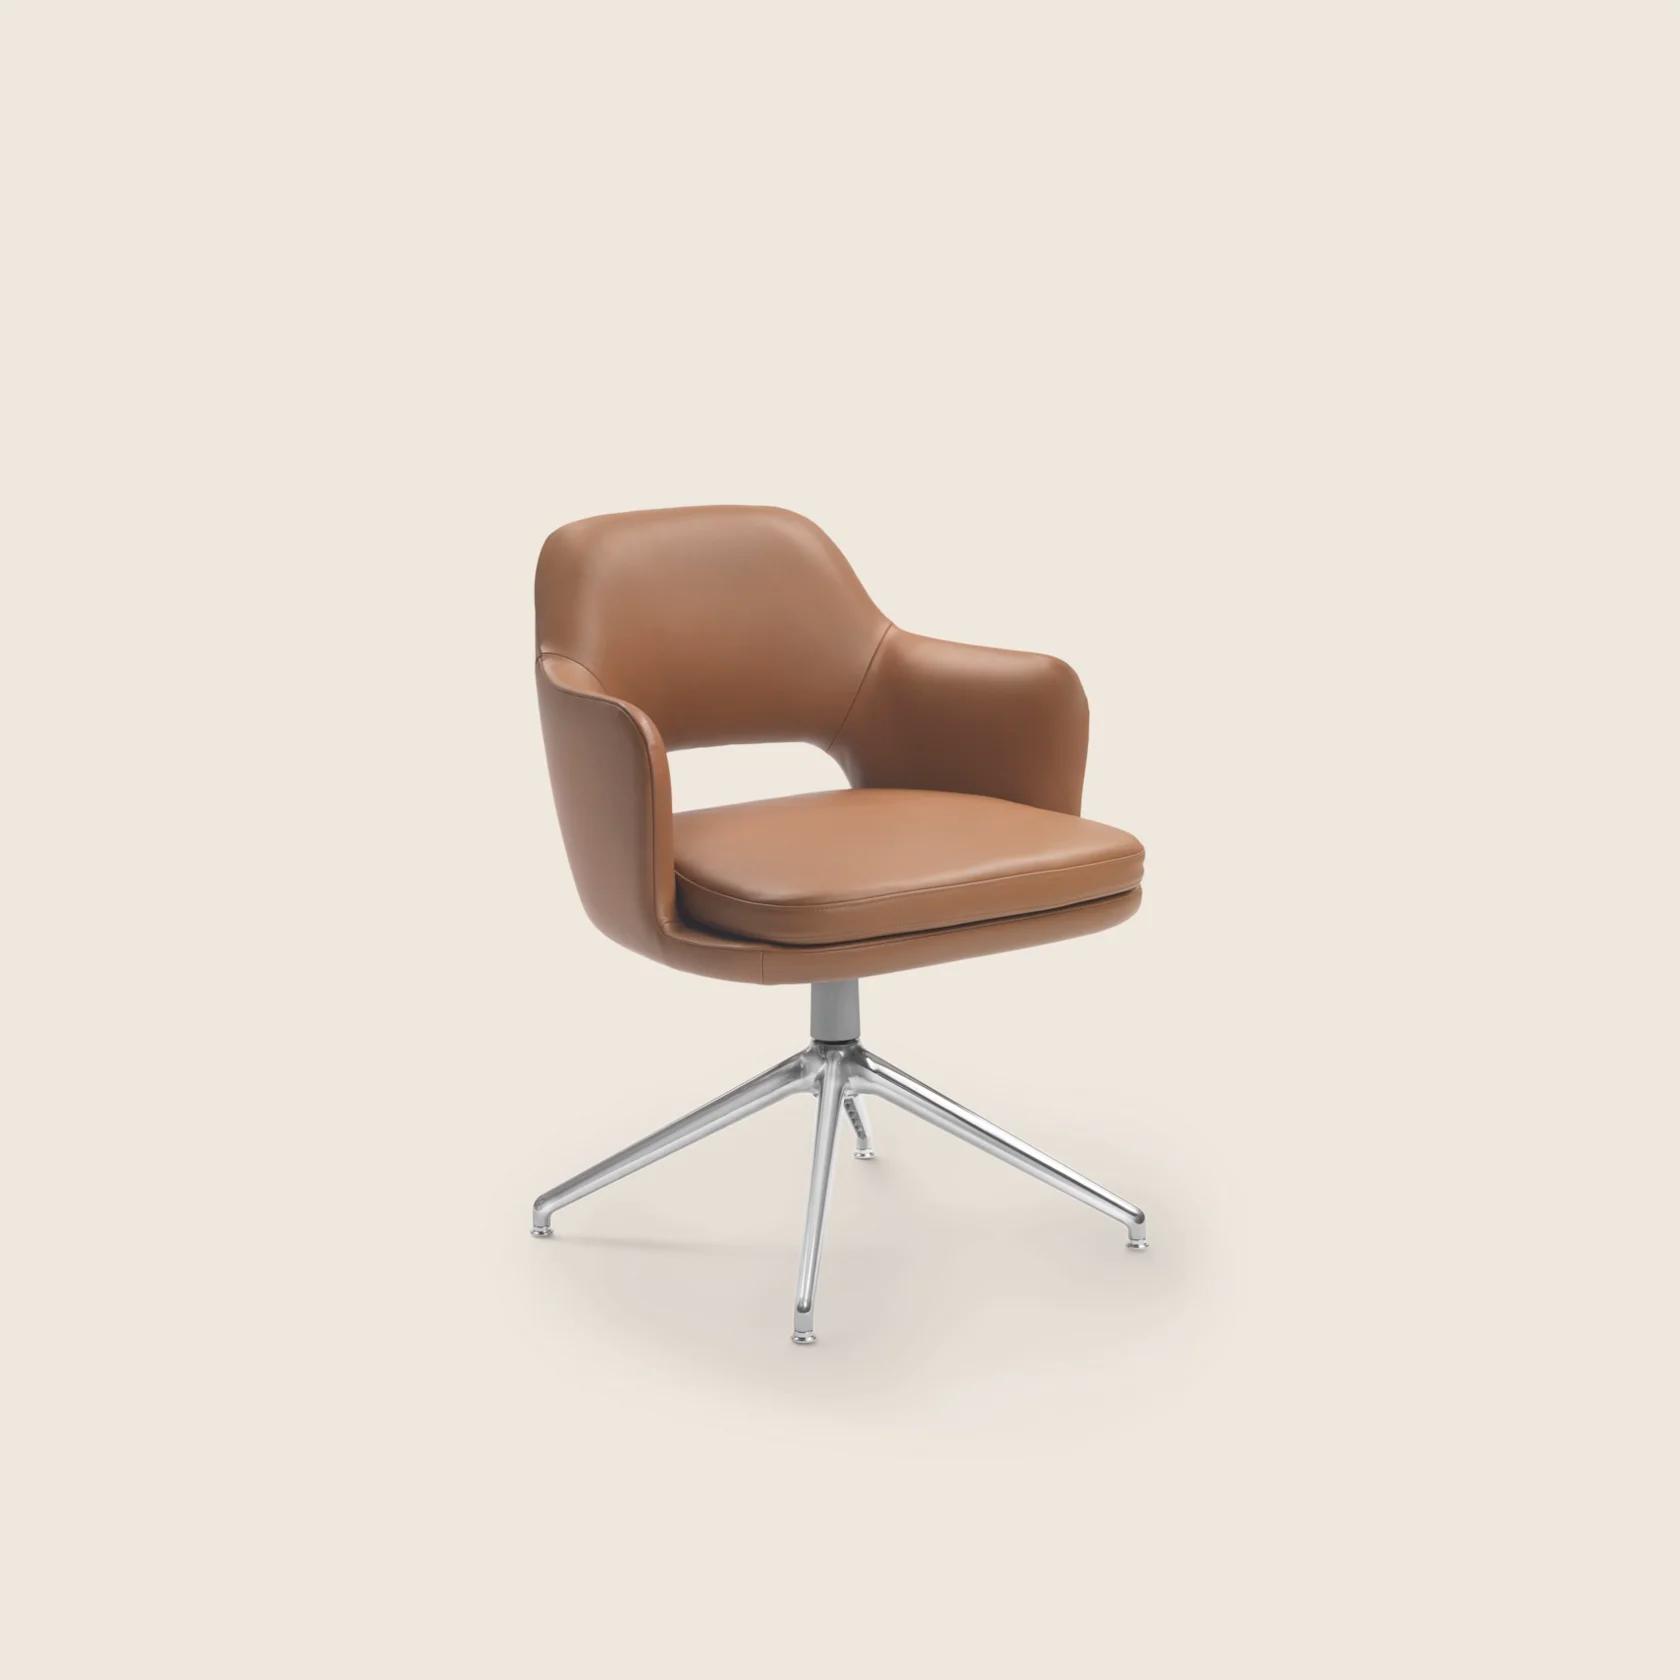 029611_ELISEO_CHAIR_01.png